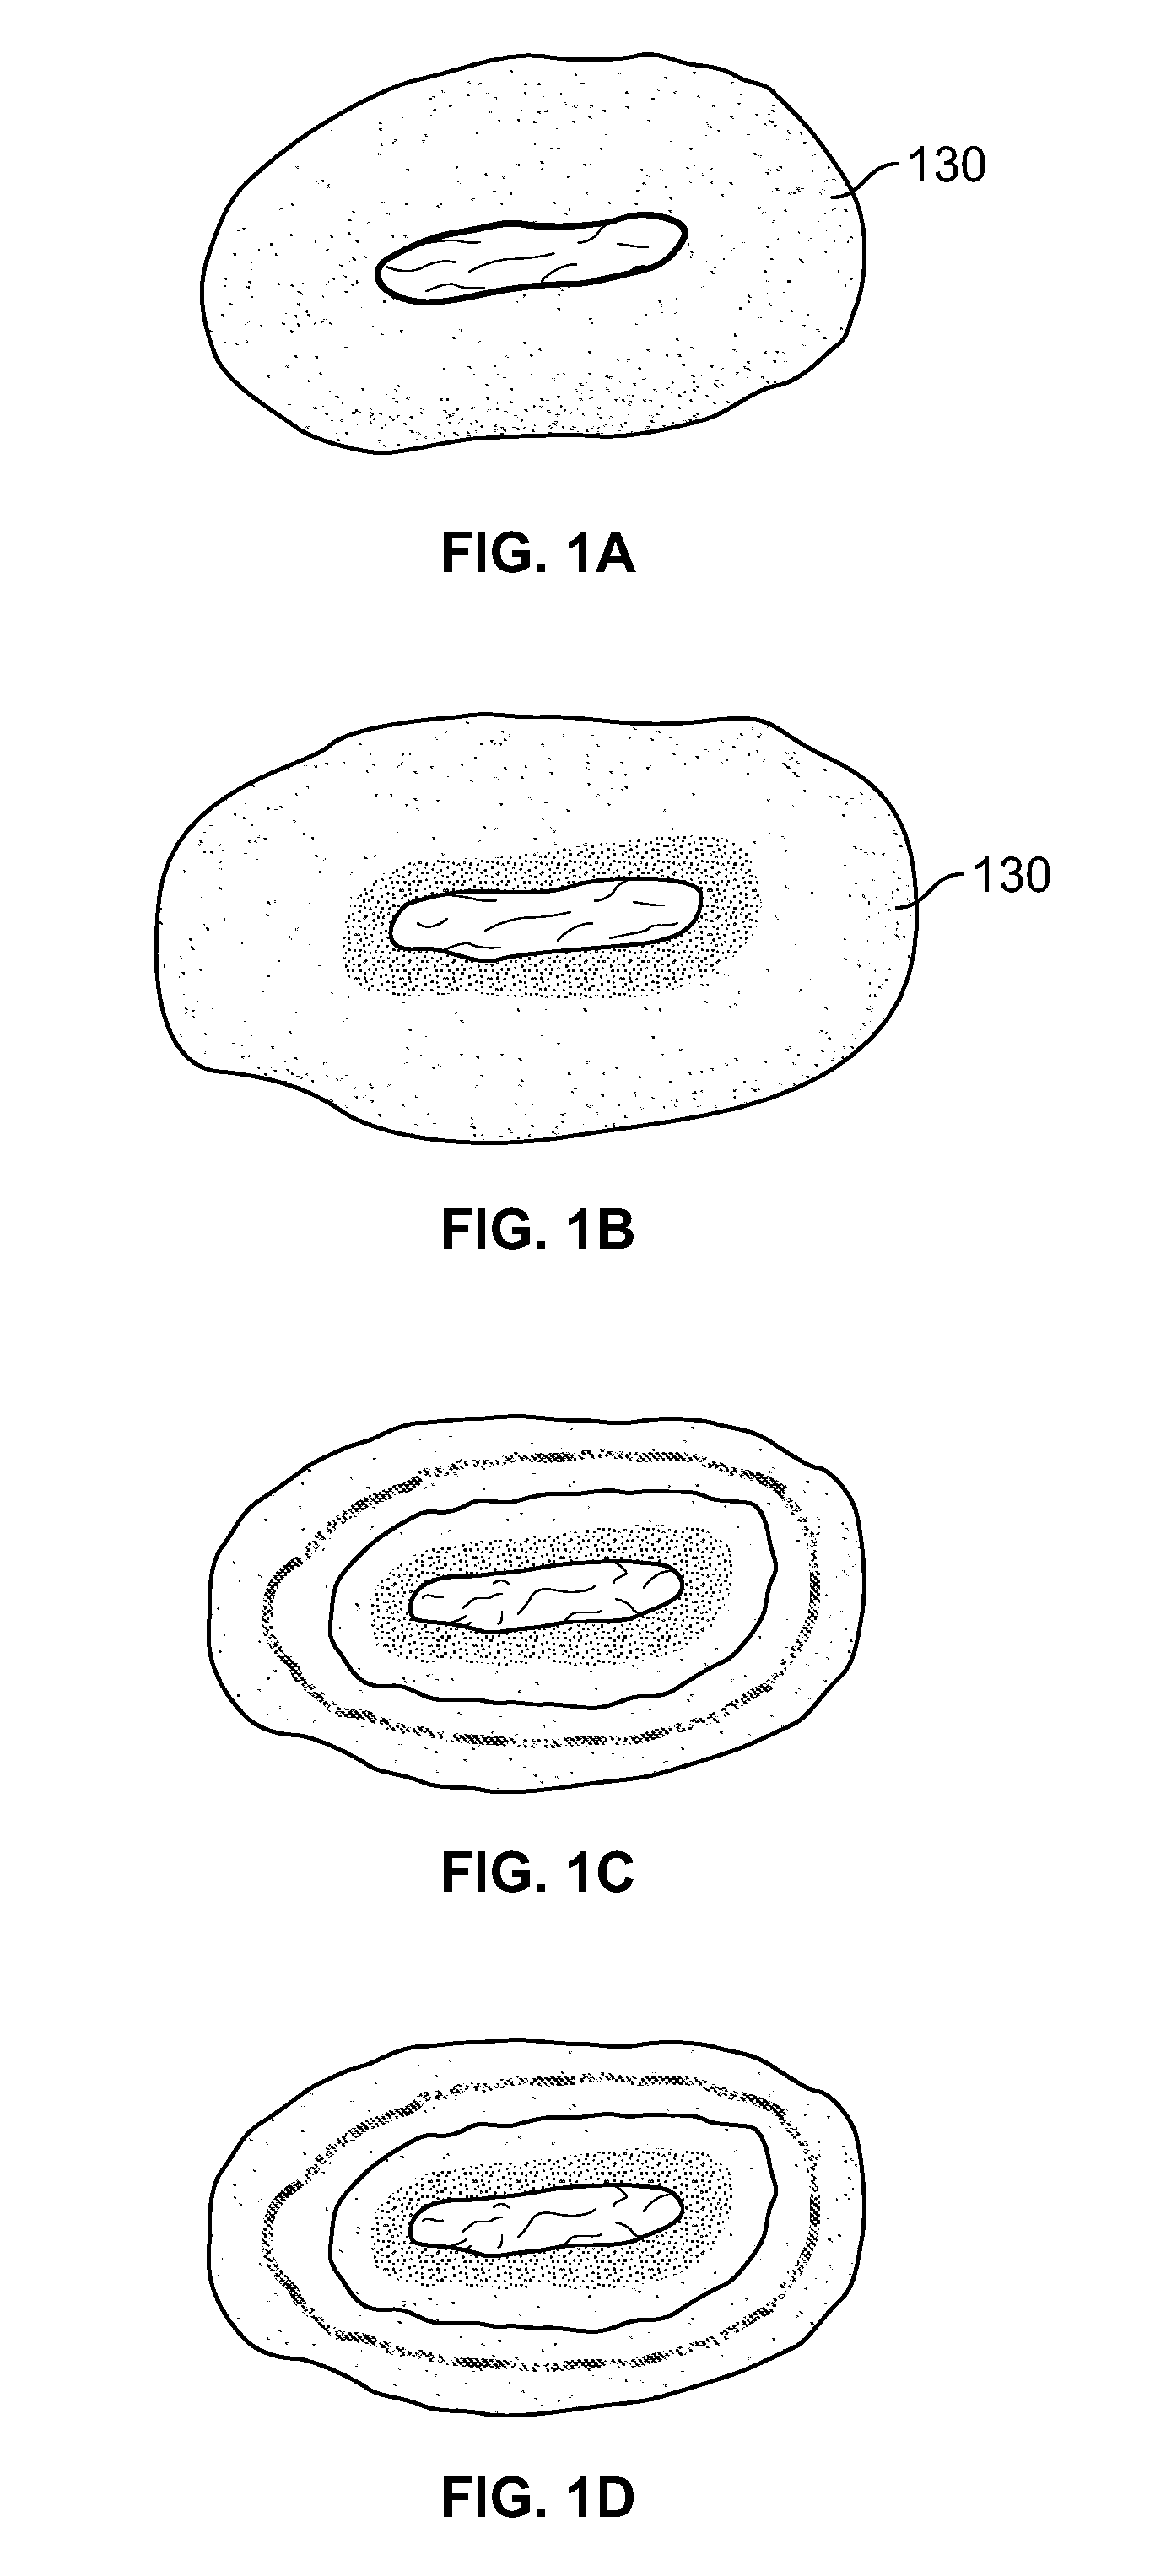 Seed coating compositions and methods for applying soil surfactants to water-repellent soil